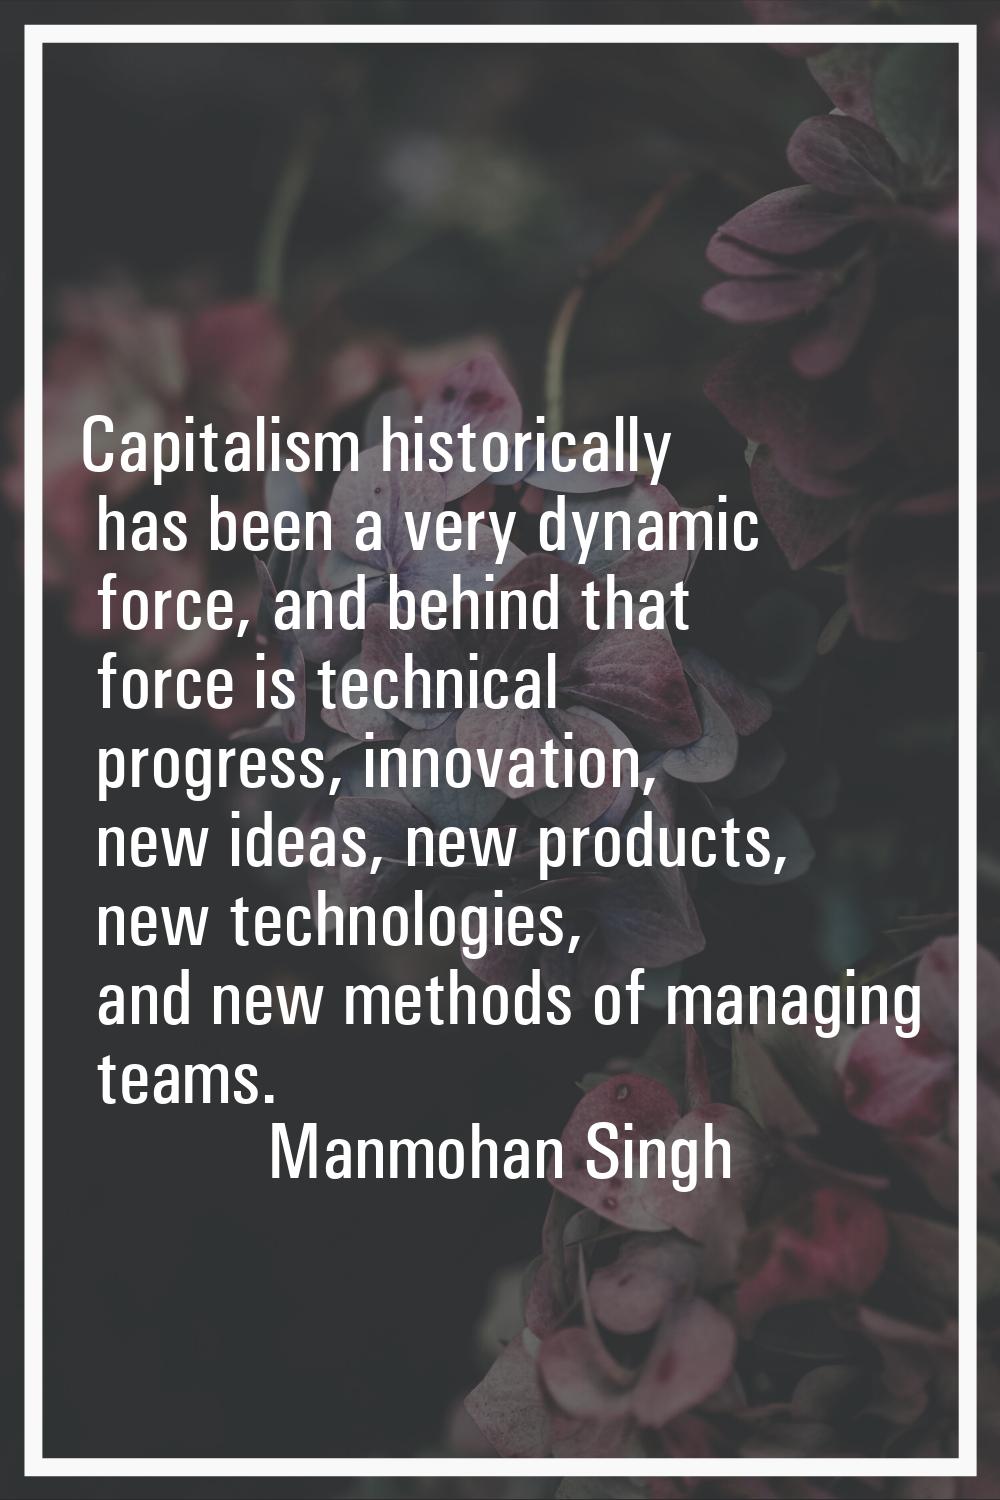 Capitalism historically has been a very dynamic force, and behind that force is technical progress,